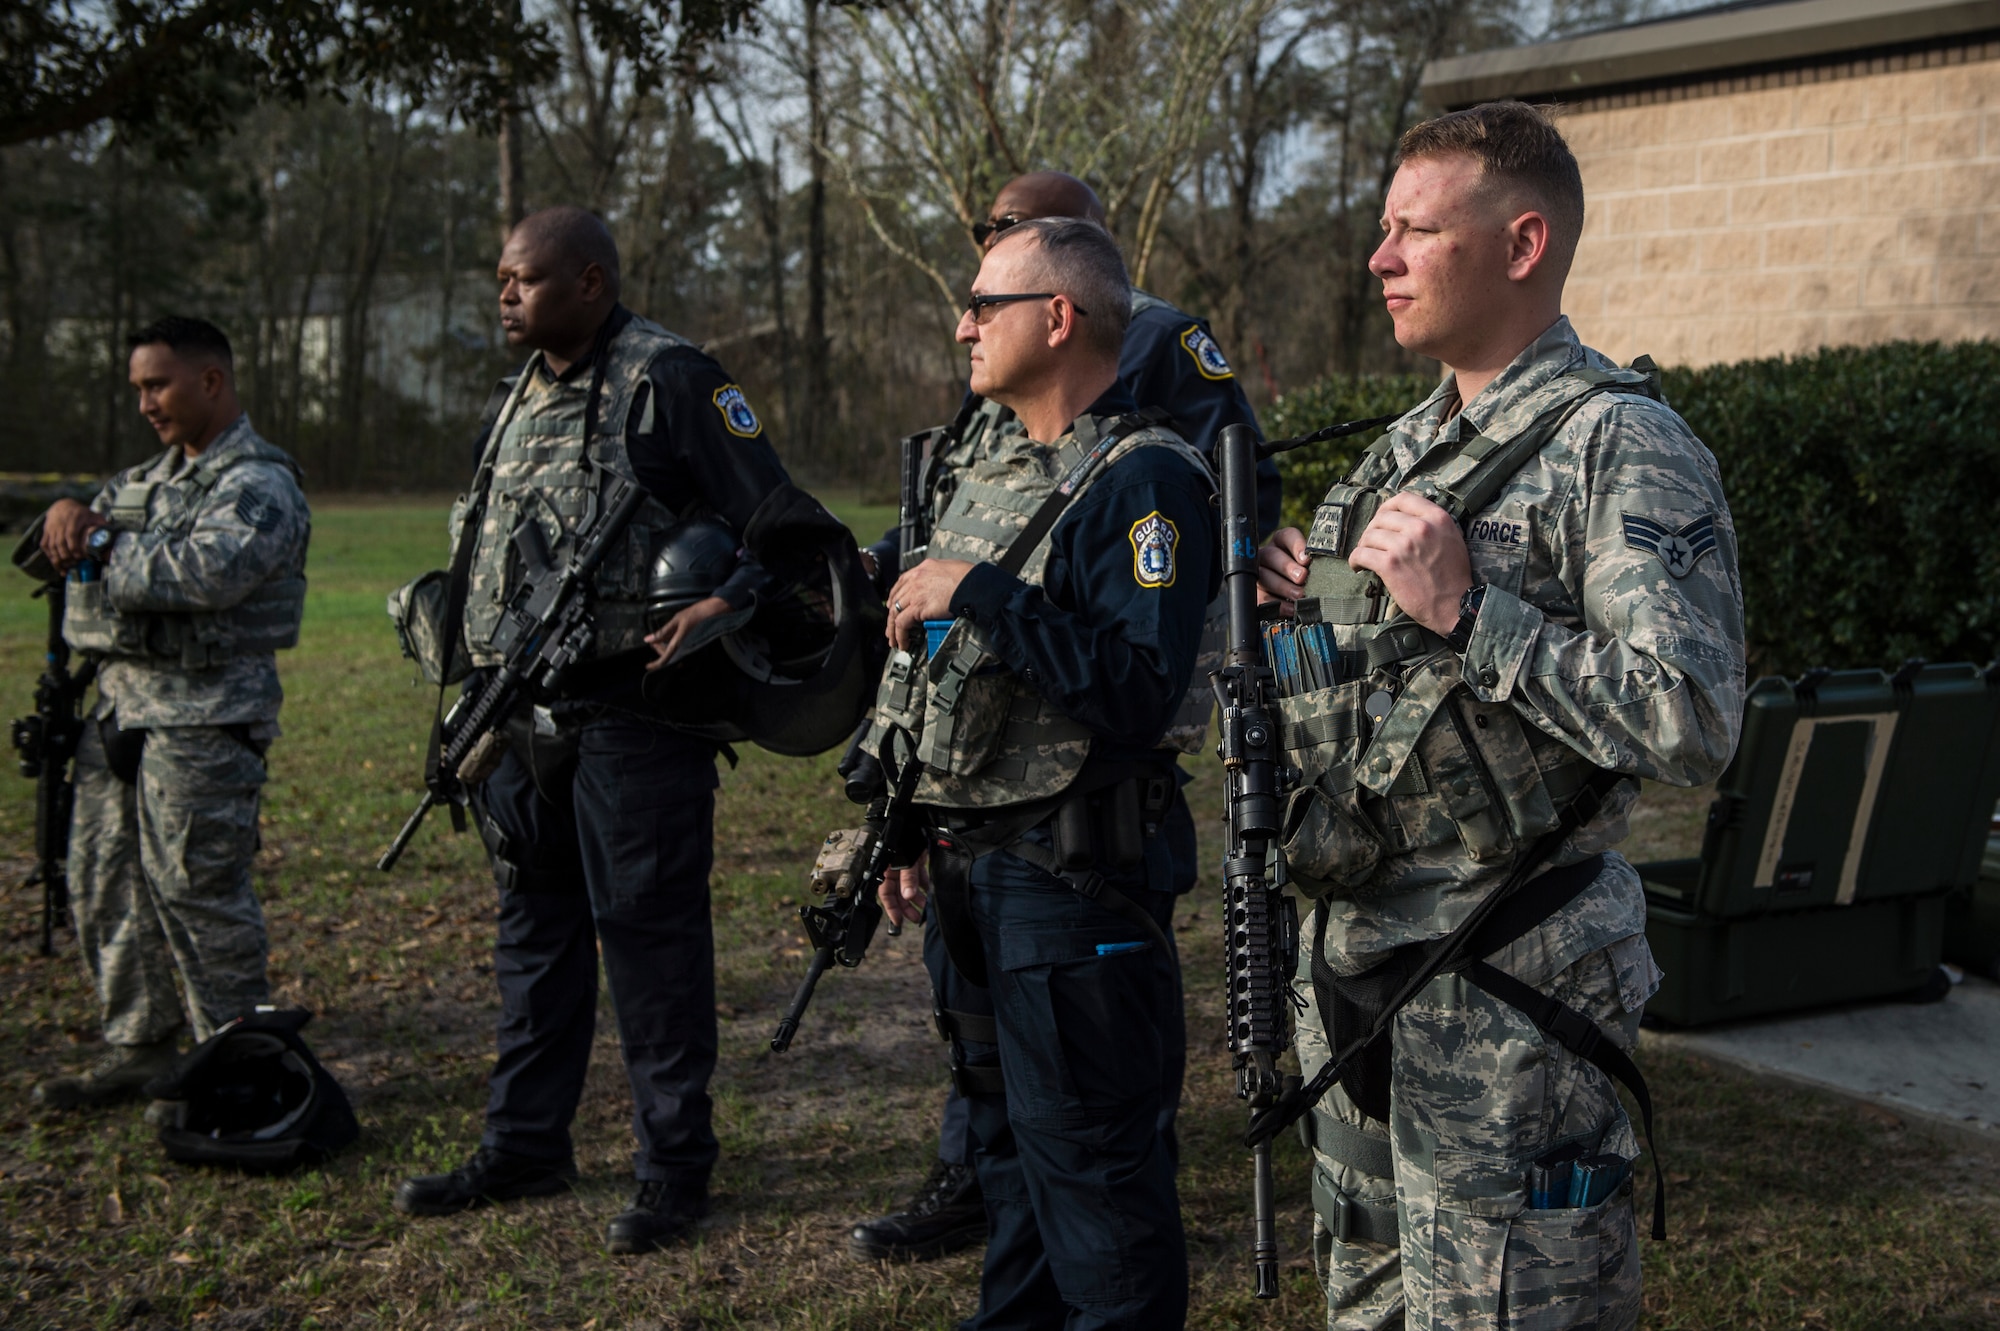 Personnel from the 23d Security Forces Squadron listen to a brief before participating in a training event, Feb. 22, 2018, at Moody Air Force Base, Ga. “Shoot, move, communicate” is a training event that tests participants on their ability to move from barricade to barricade as a team. While one member provided covering fire the others advanced on the enemy, then retreated from the scenario while they maintained cover fire. Security Forces members would employ these tactics anytime they’re under enemy fire. (U.S. Air Force photo by Senior Airman Janiqua P. Robinson)